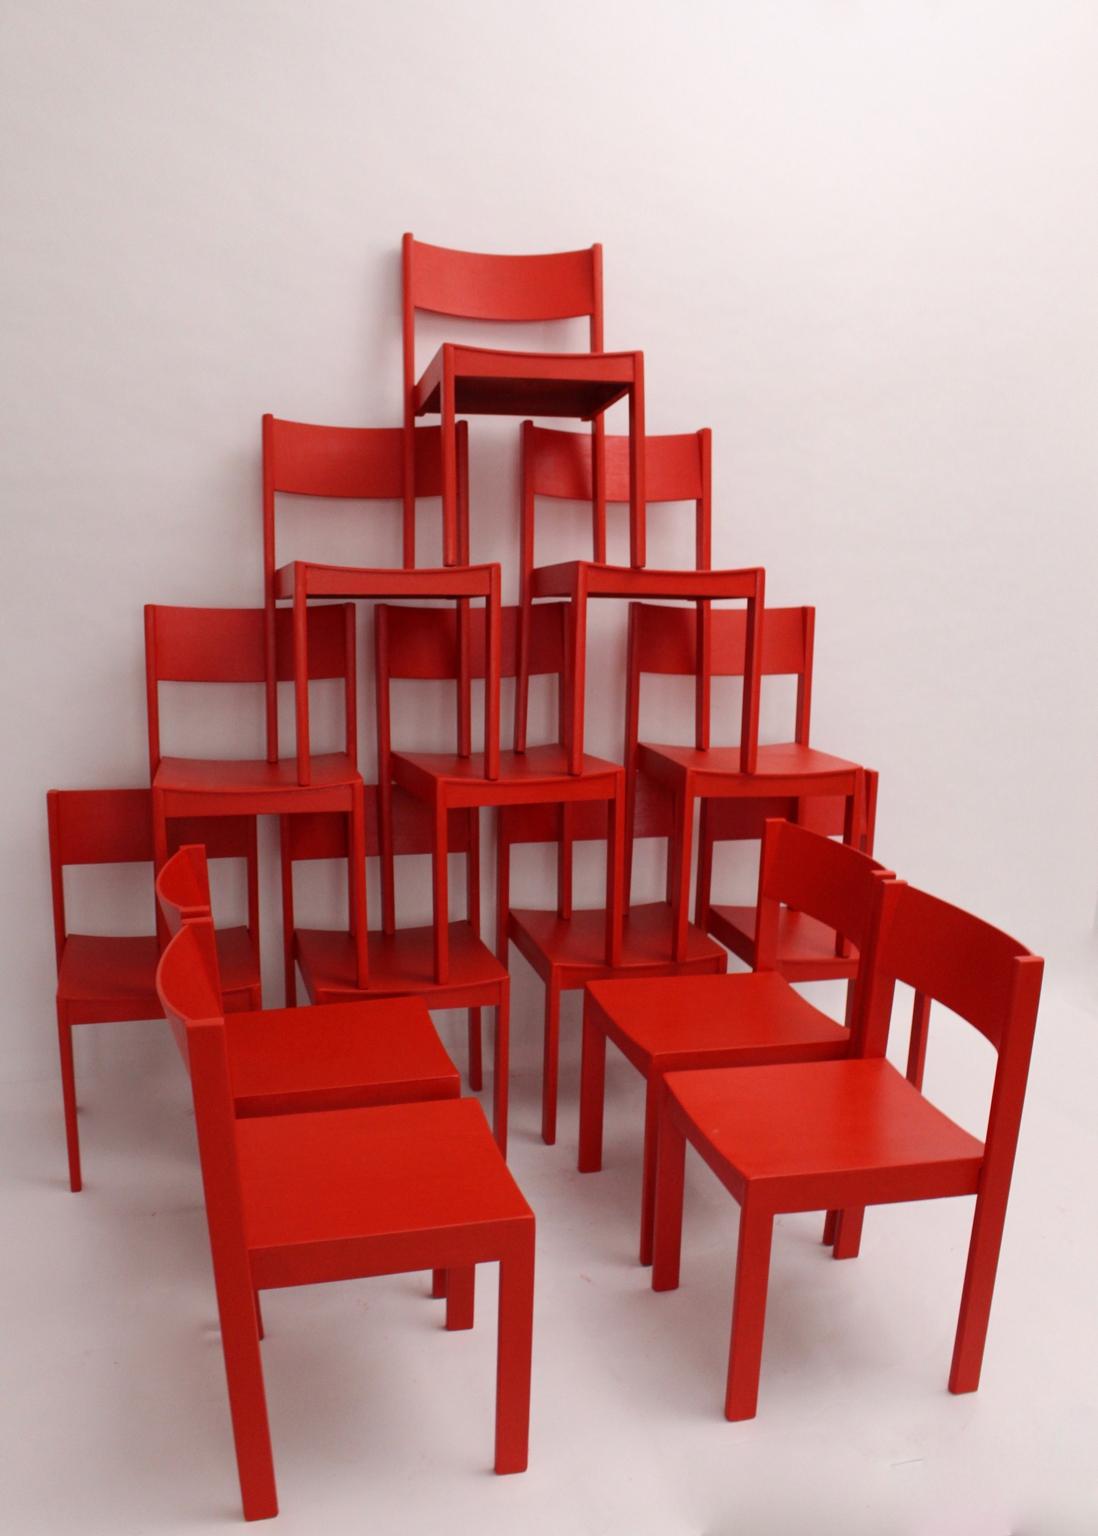 A rare set of 14 red stackable dining room chairs, which was made out of solid beechwood and plywood.
The dining chairs have been cleaned and newly red lacquered.
Carl Auböck designed the dining chairs for the Anna Boschek dormitory, 1965, Vienna